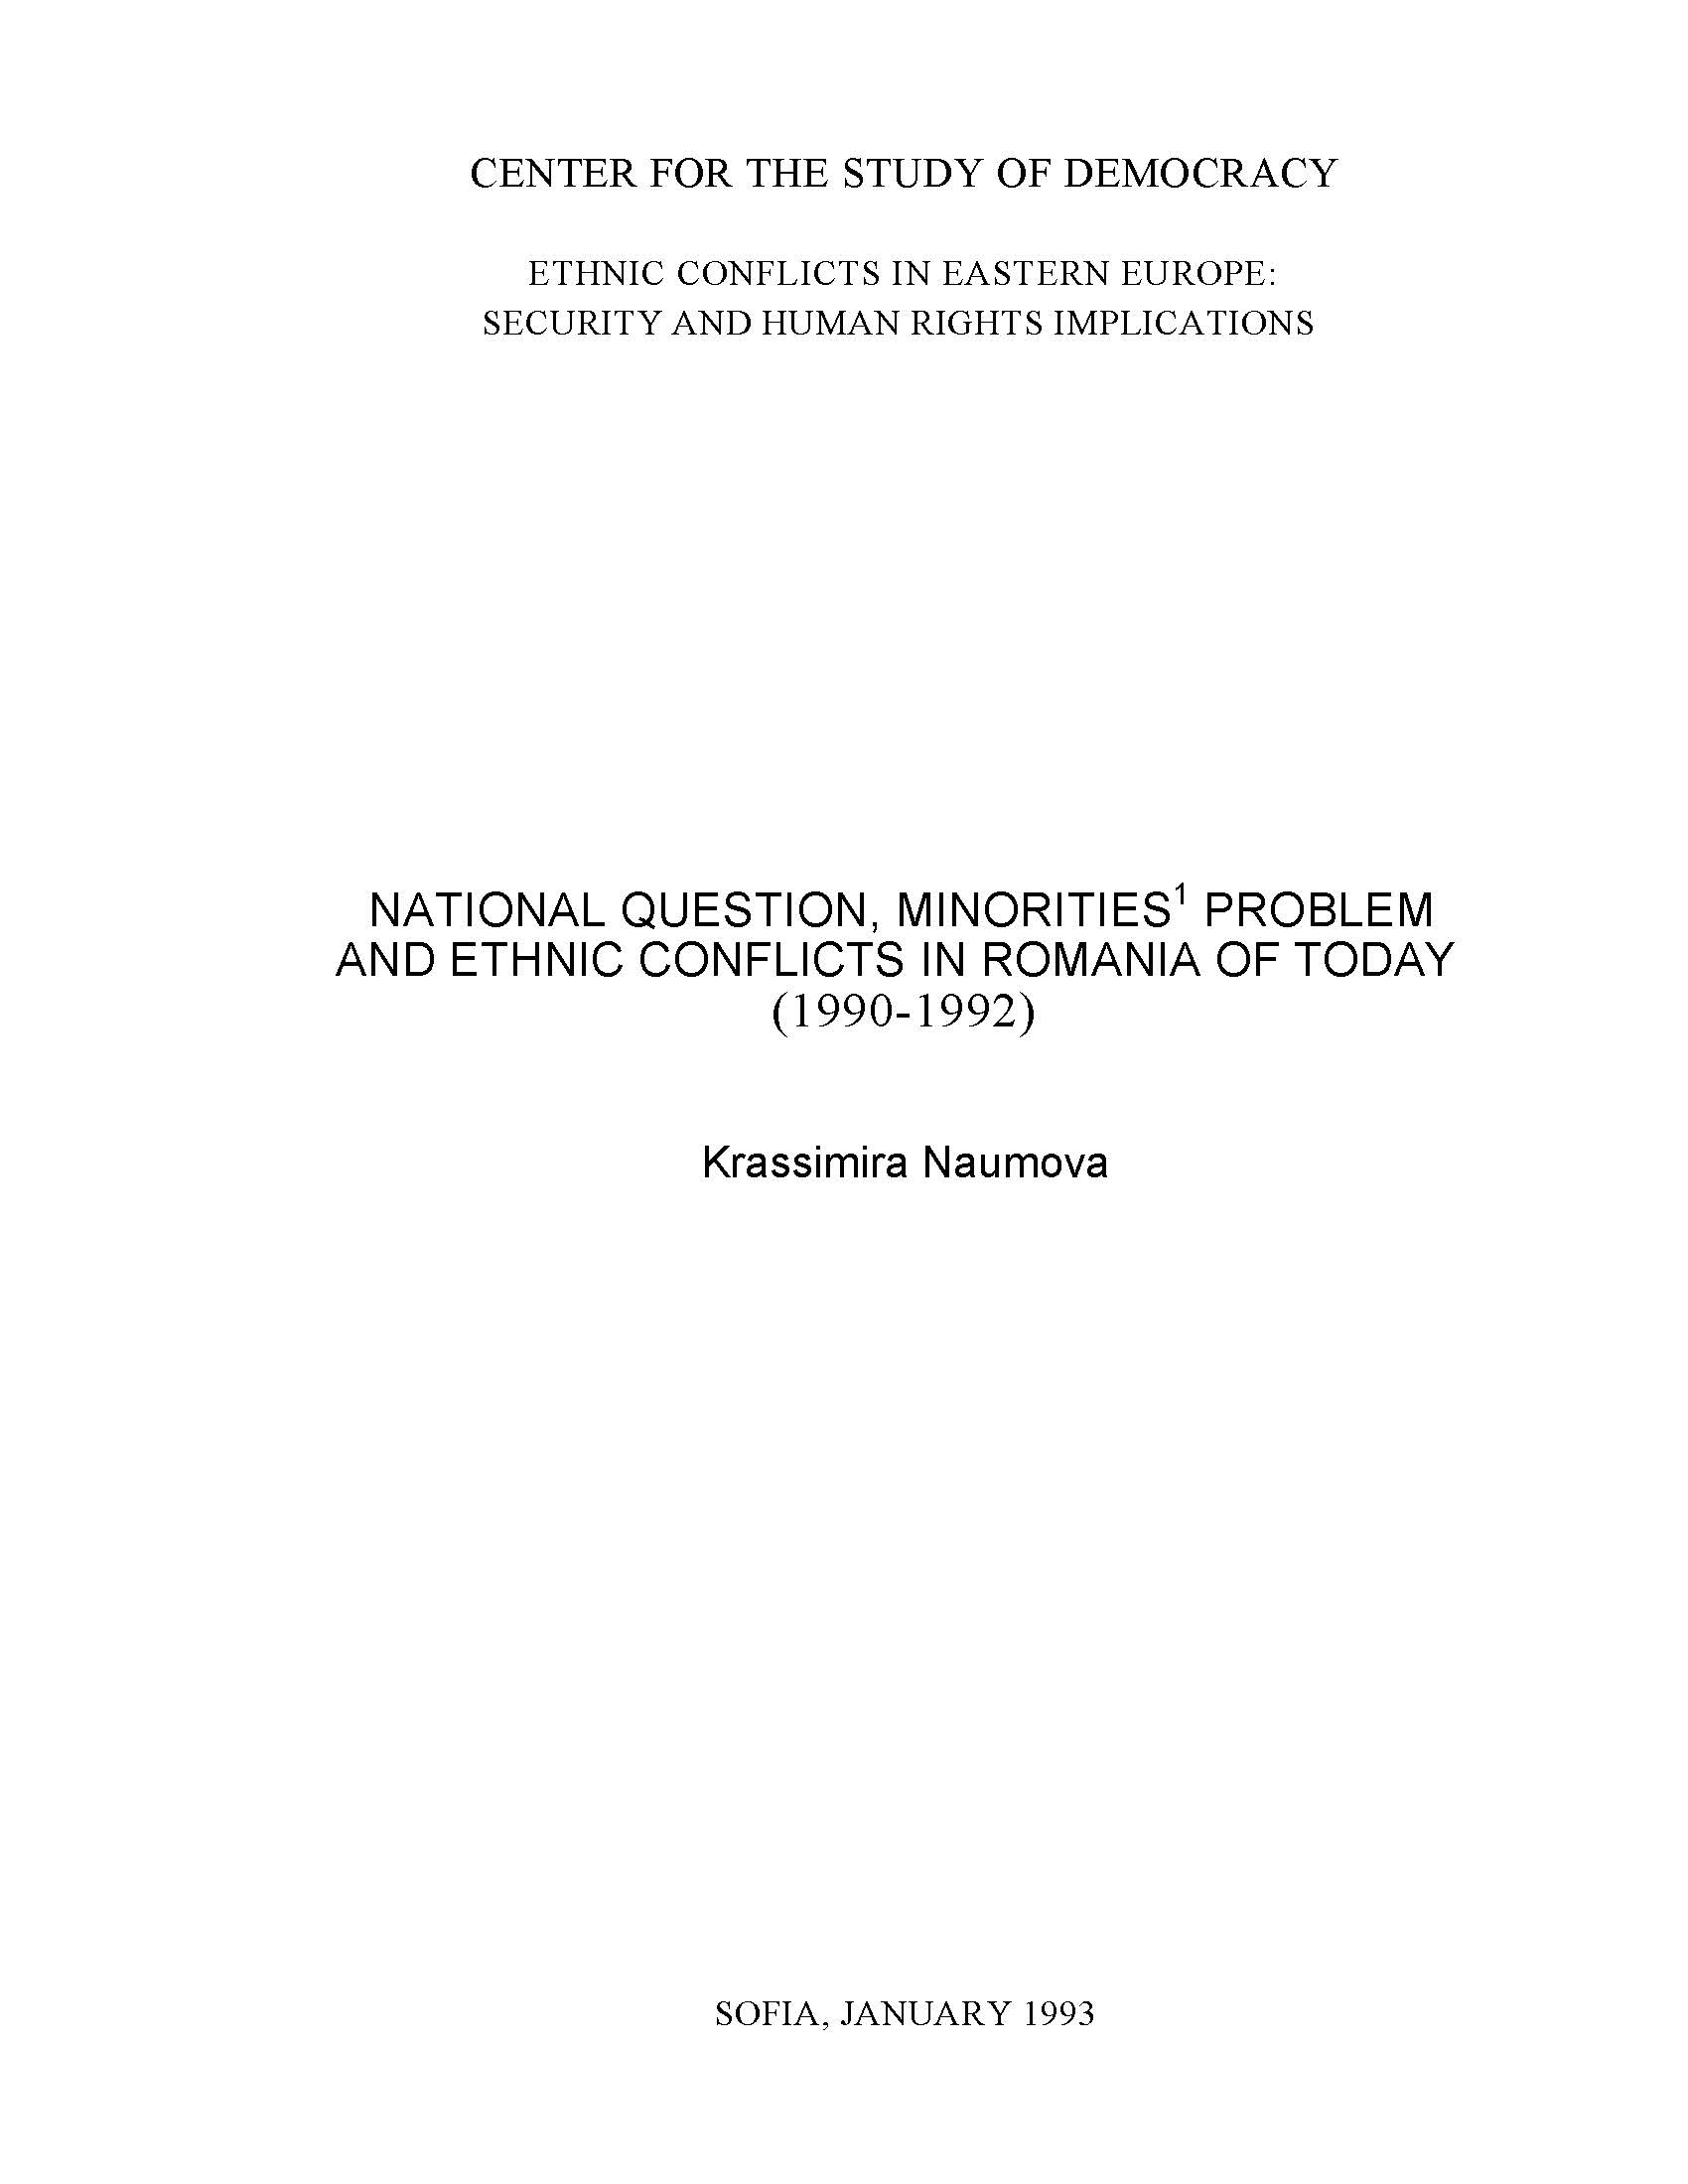 National Question, Minorities’ Problem and Ethnic Conflicts in Romania of Today (1990-1992)